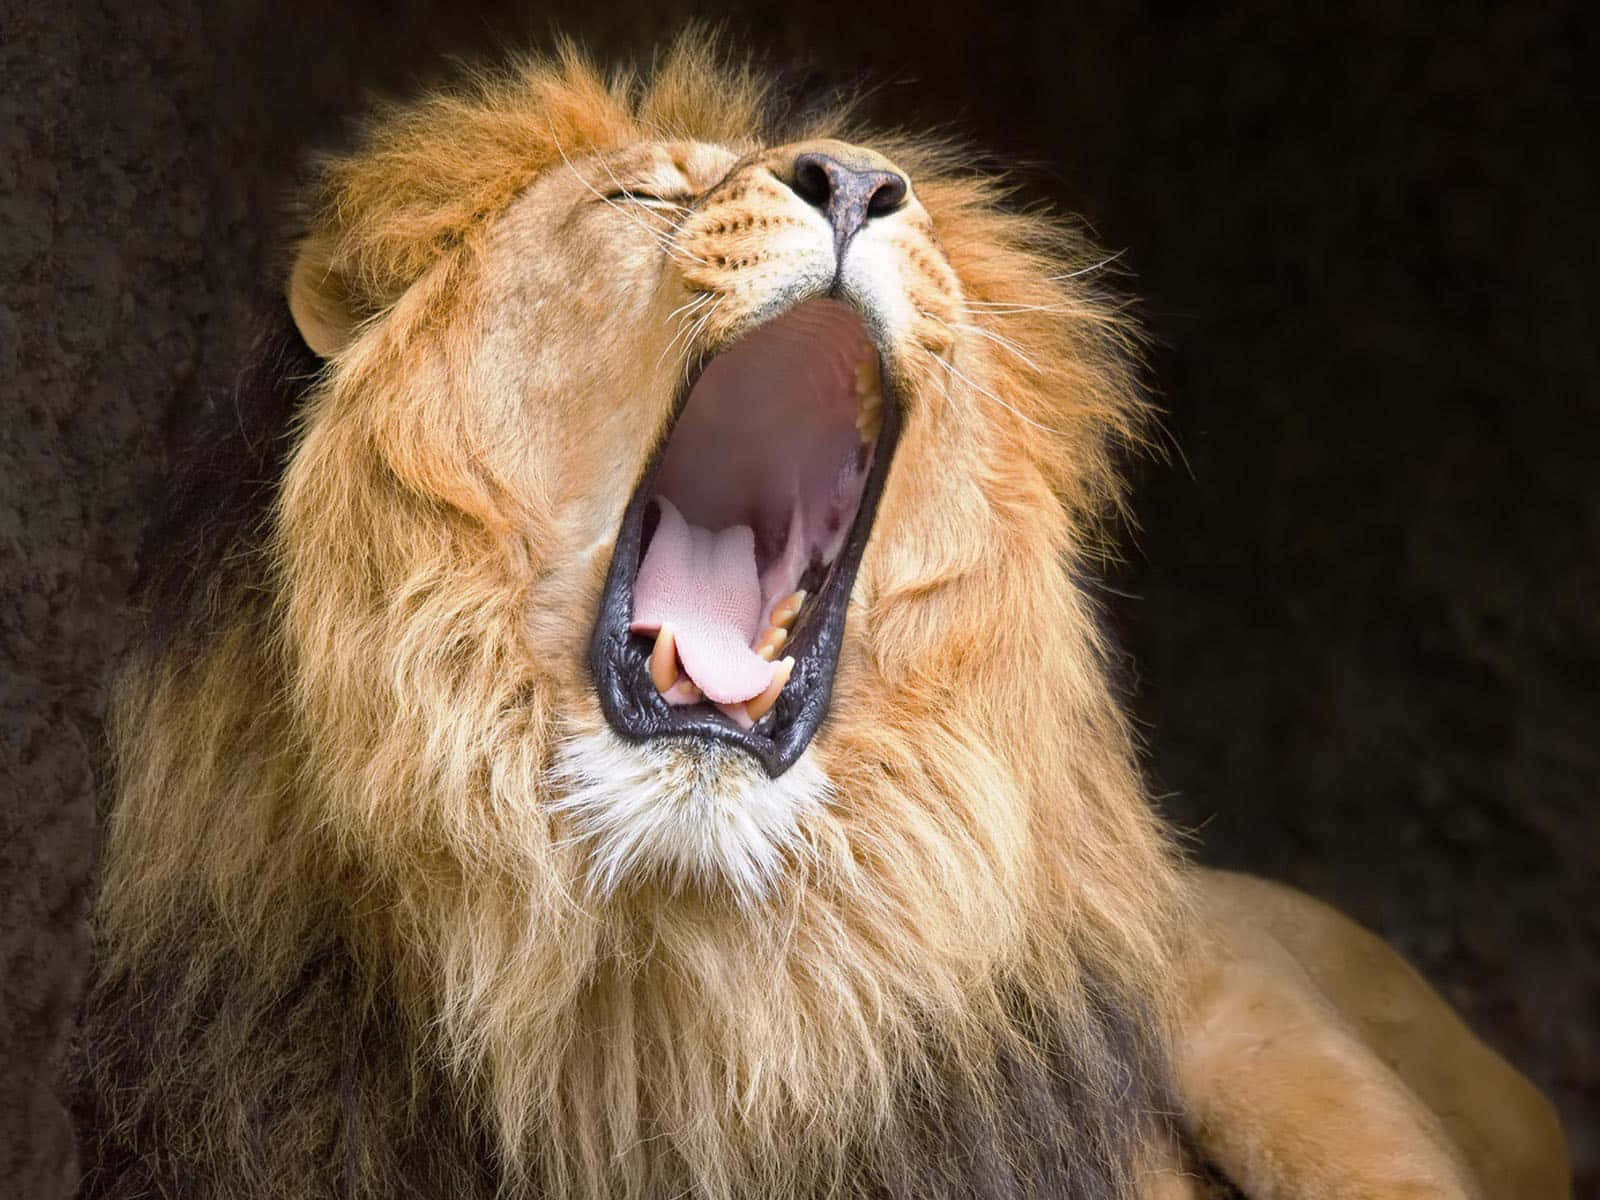 Roaring Lion: King of the Jungle Wallpaper